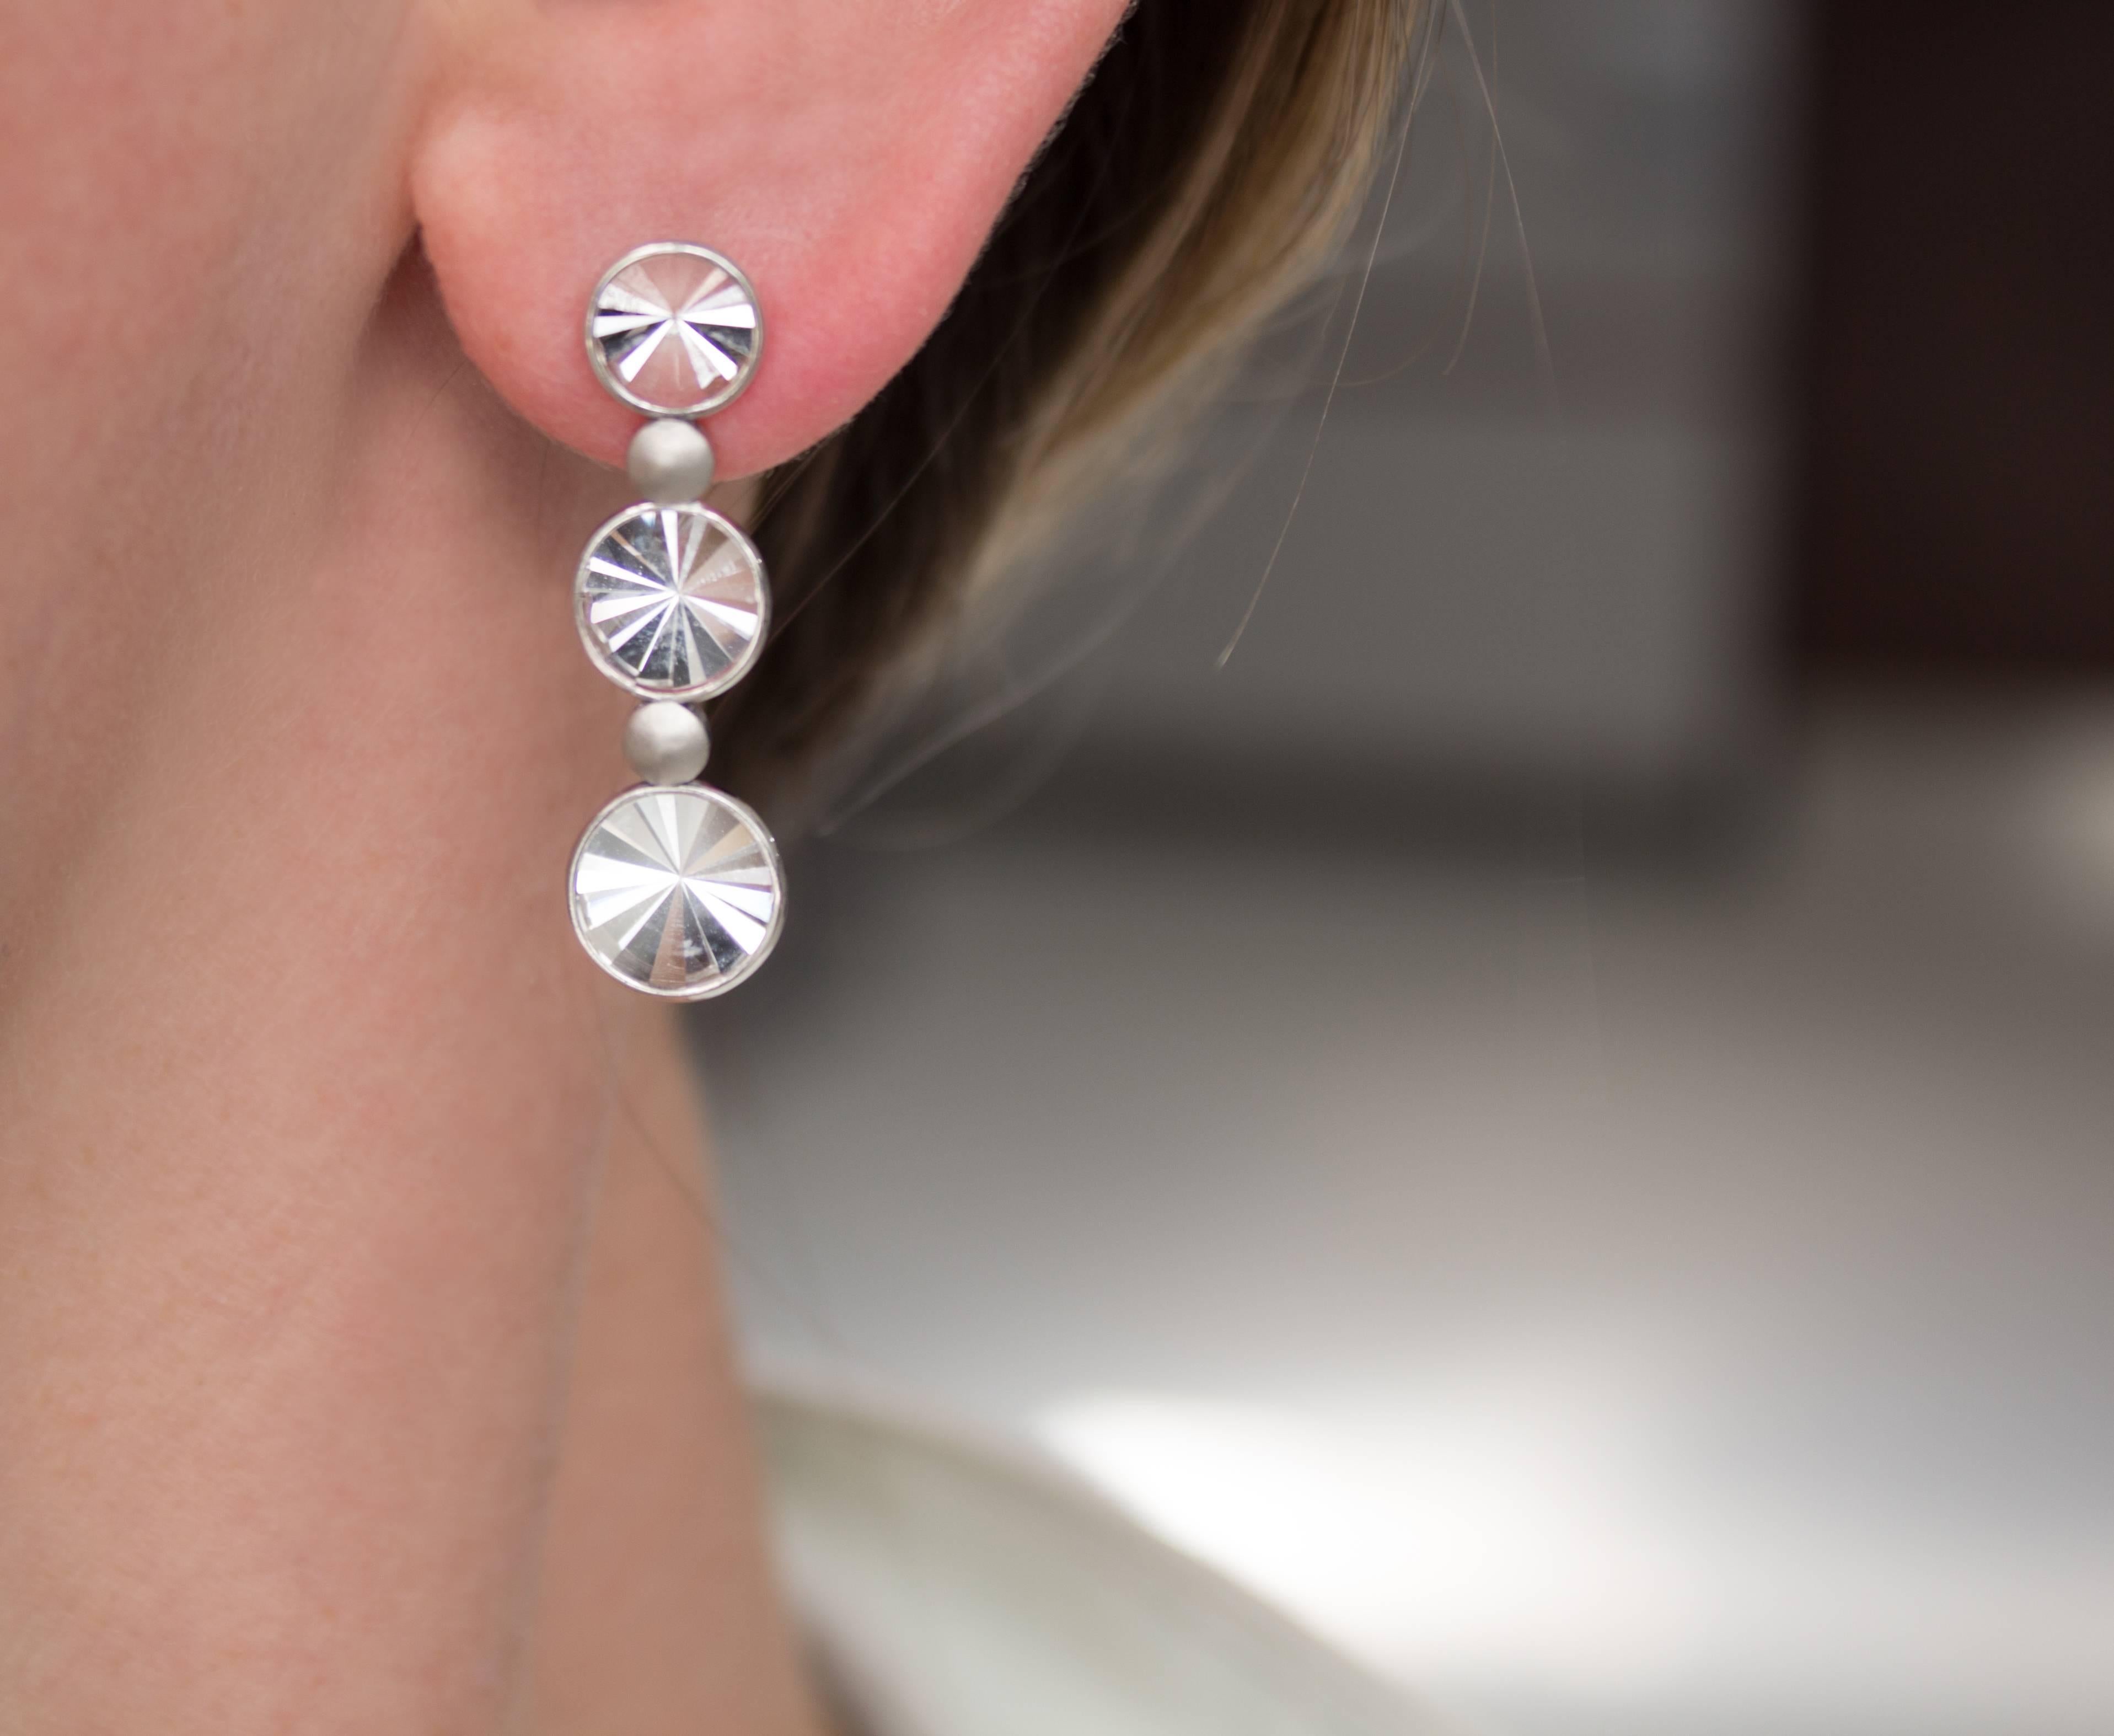 One of a Kind Waterfall Earrings handcrafted in Rio de Janeiro by jewelry maker Antonio Bernardo featuring six signature prism-cut rock crystal elements set in polished 18k white gold and accented by matte-finished 18k white gold disc elements.